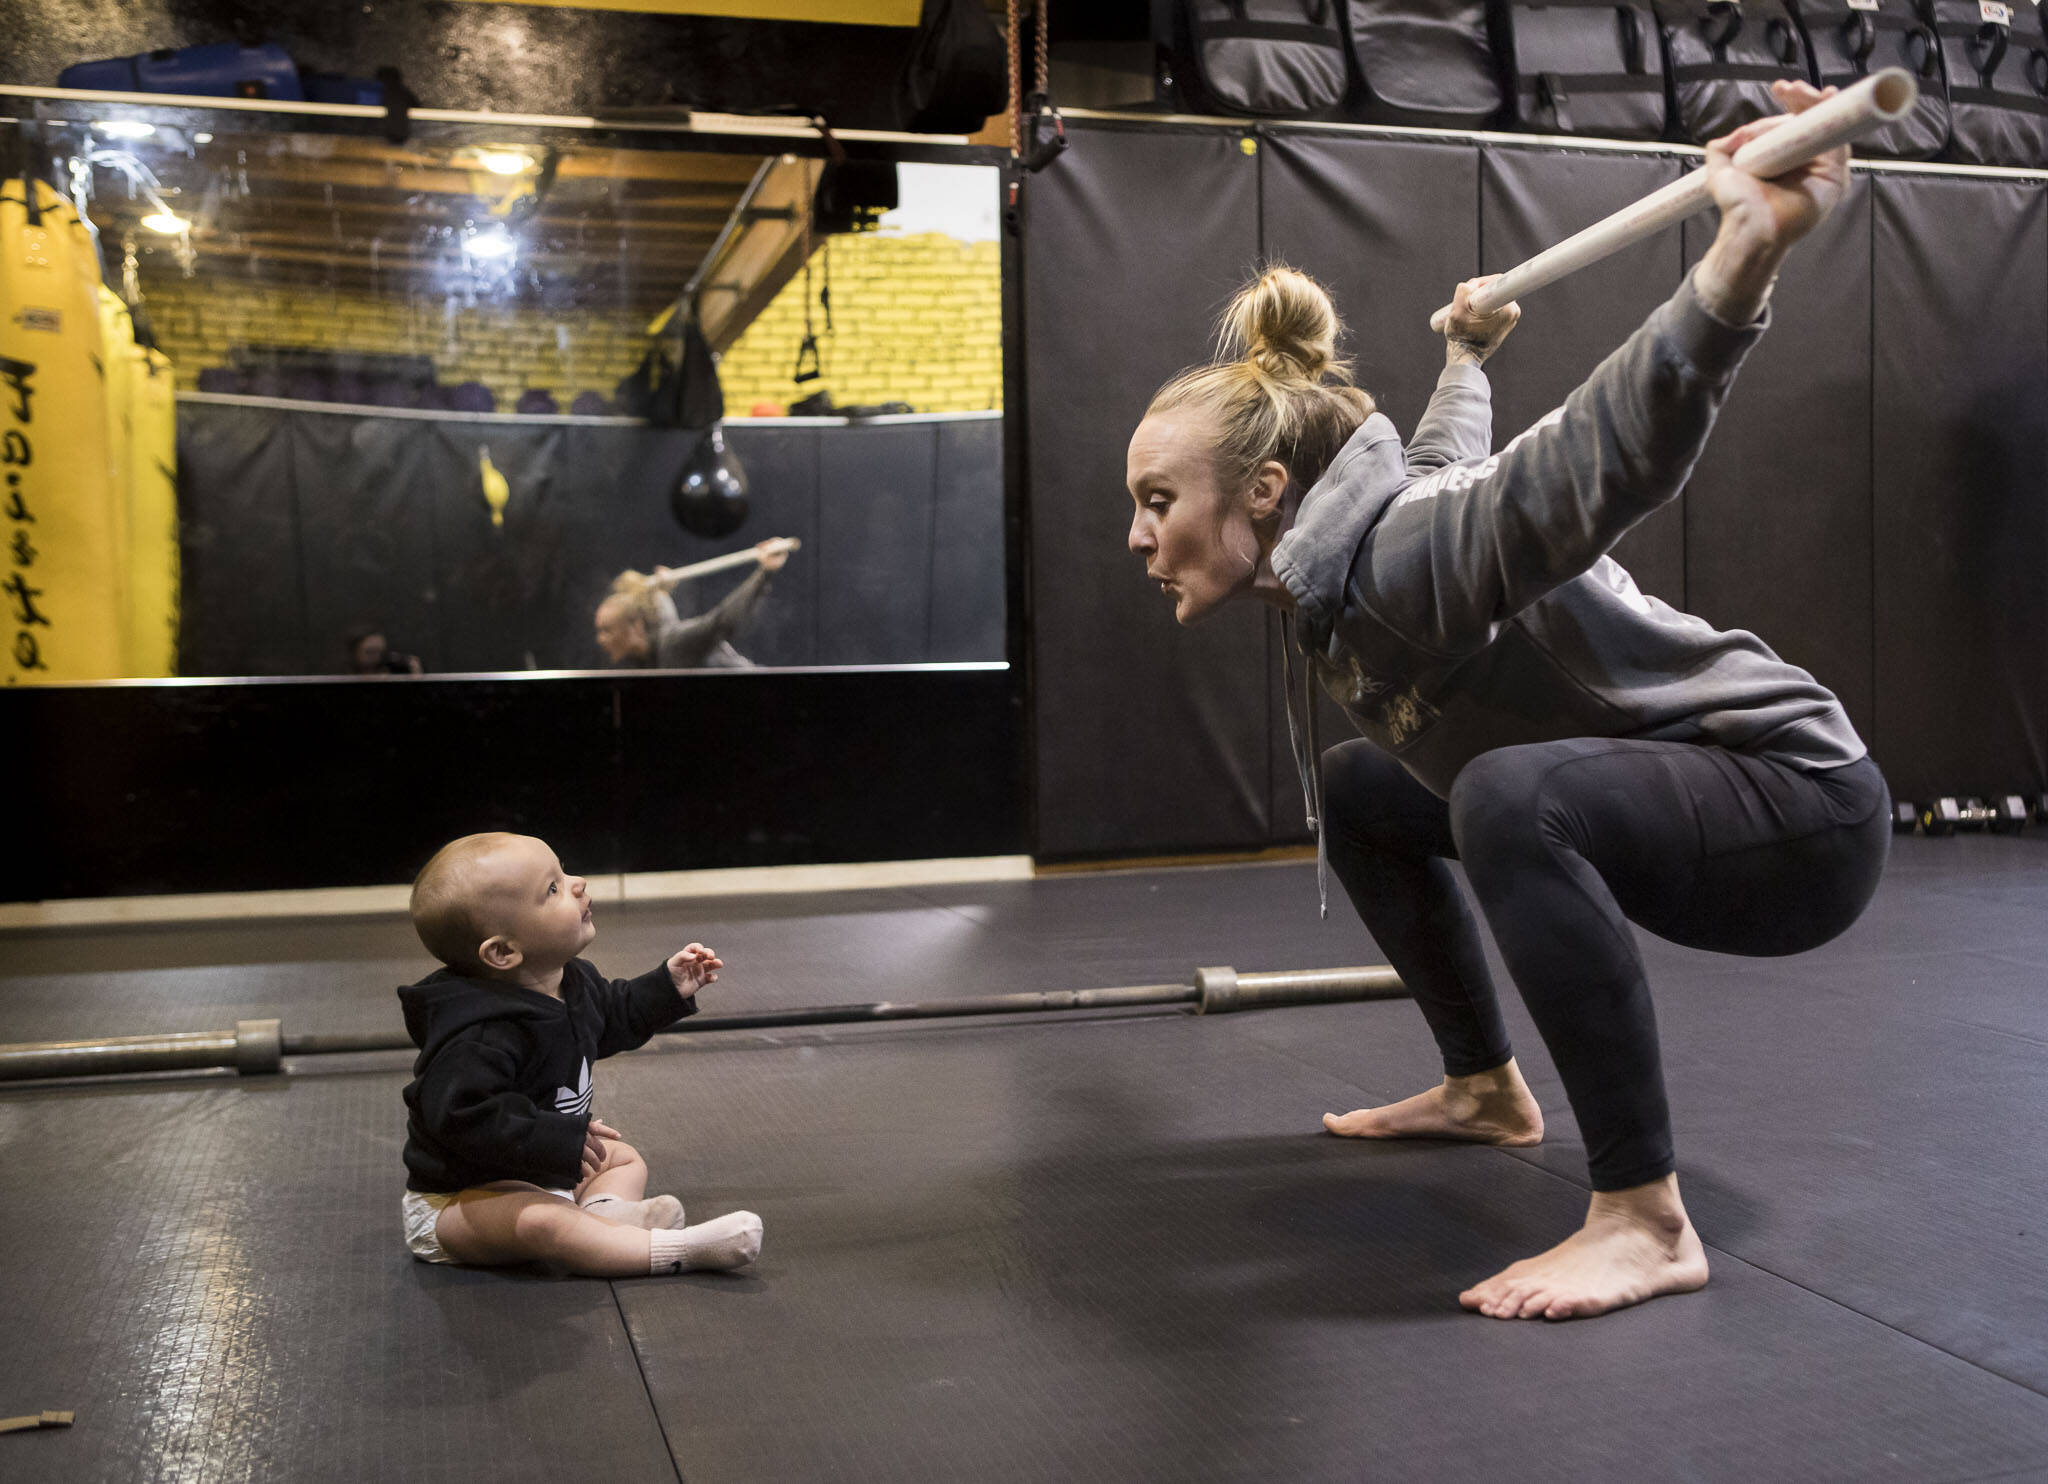 Miranda Granger makes a face at her daughter, Austin, while she does an overhead squat during a warmup in February 2022 at Charlie’s Combat Club in Everett, Washington. Six months after giving birth, Granger finally ramped up the intensity of her training. In the meantime, she had struggled with fatigue and pelvic floor issues. (Olivia Vanni / The Herald)